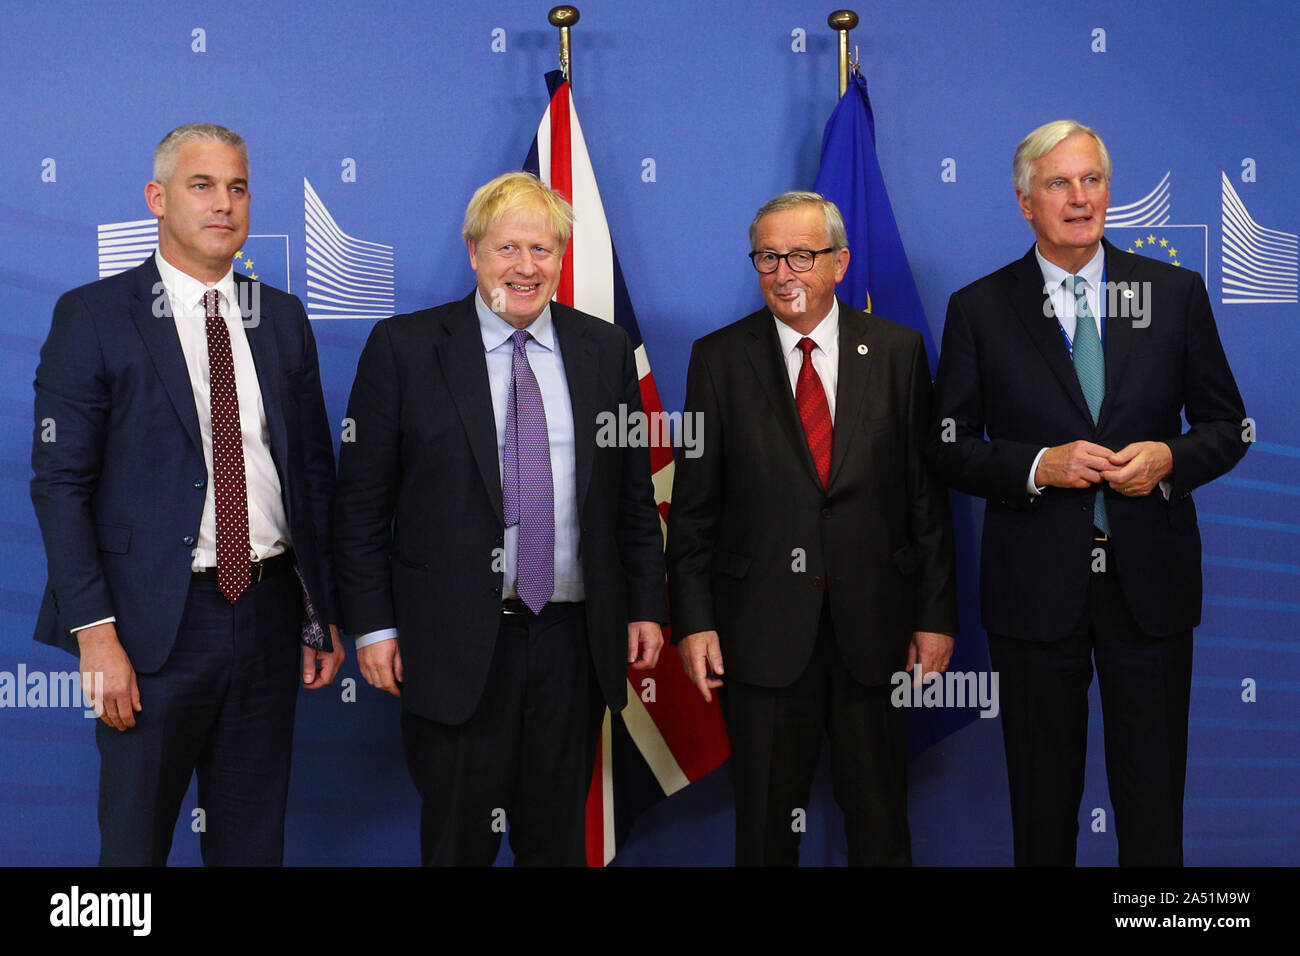 Brussels, Belgium. 17th Oct, 2019. British Prime Minister Boris Johnson (2nd L), British Brexit Secretary Stephen Barclay (1st L), President of the European Commission Jean-Claude Juncker (2nd R) and the EU's chief Brexit negotiator Michel Barnier pose for photos after meeting the press at the European Commission headquarters in Brussels, Belgium, Oct. 17, 2019. The European Union and Britain have reached a new Brexit deal, Jean-Claude Juncker said Thursday on his twitter account. Credit: Zheng Huansong/Xinhua/Alamy Live News Stock Photo